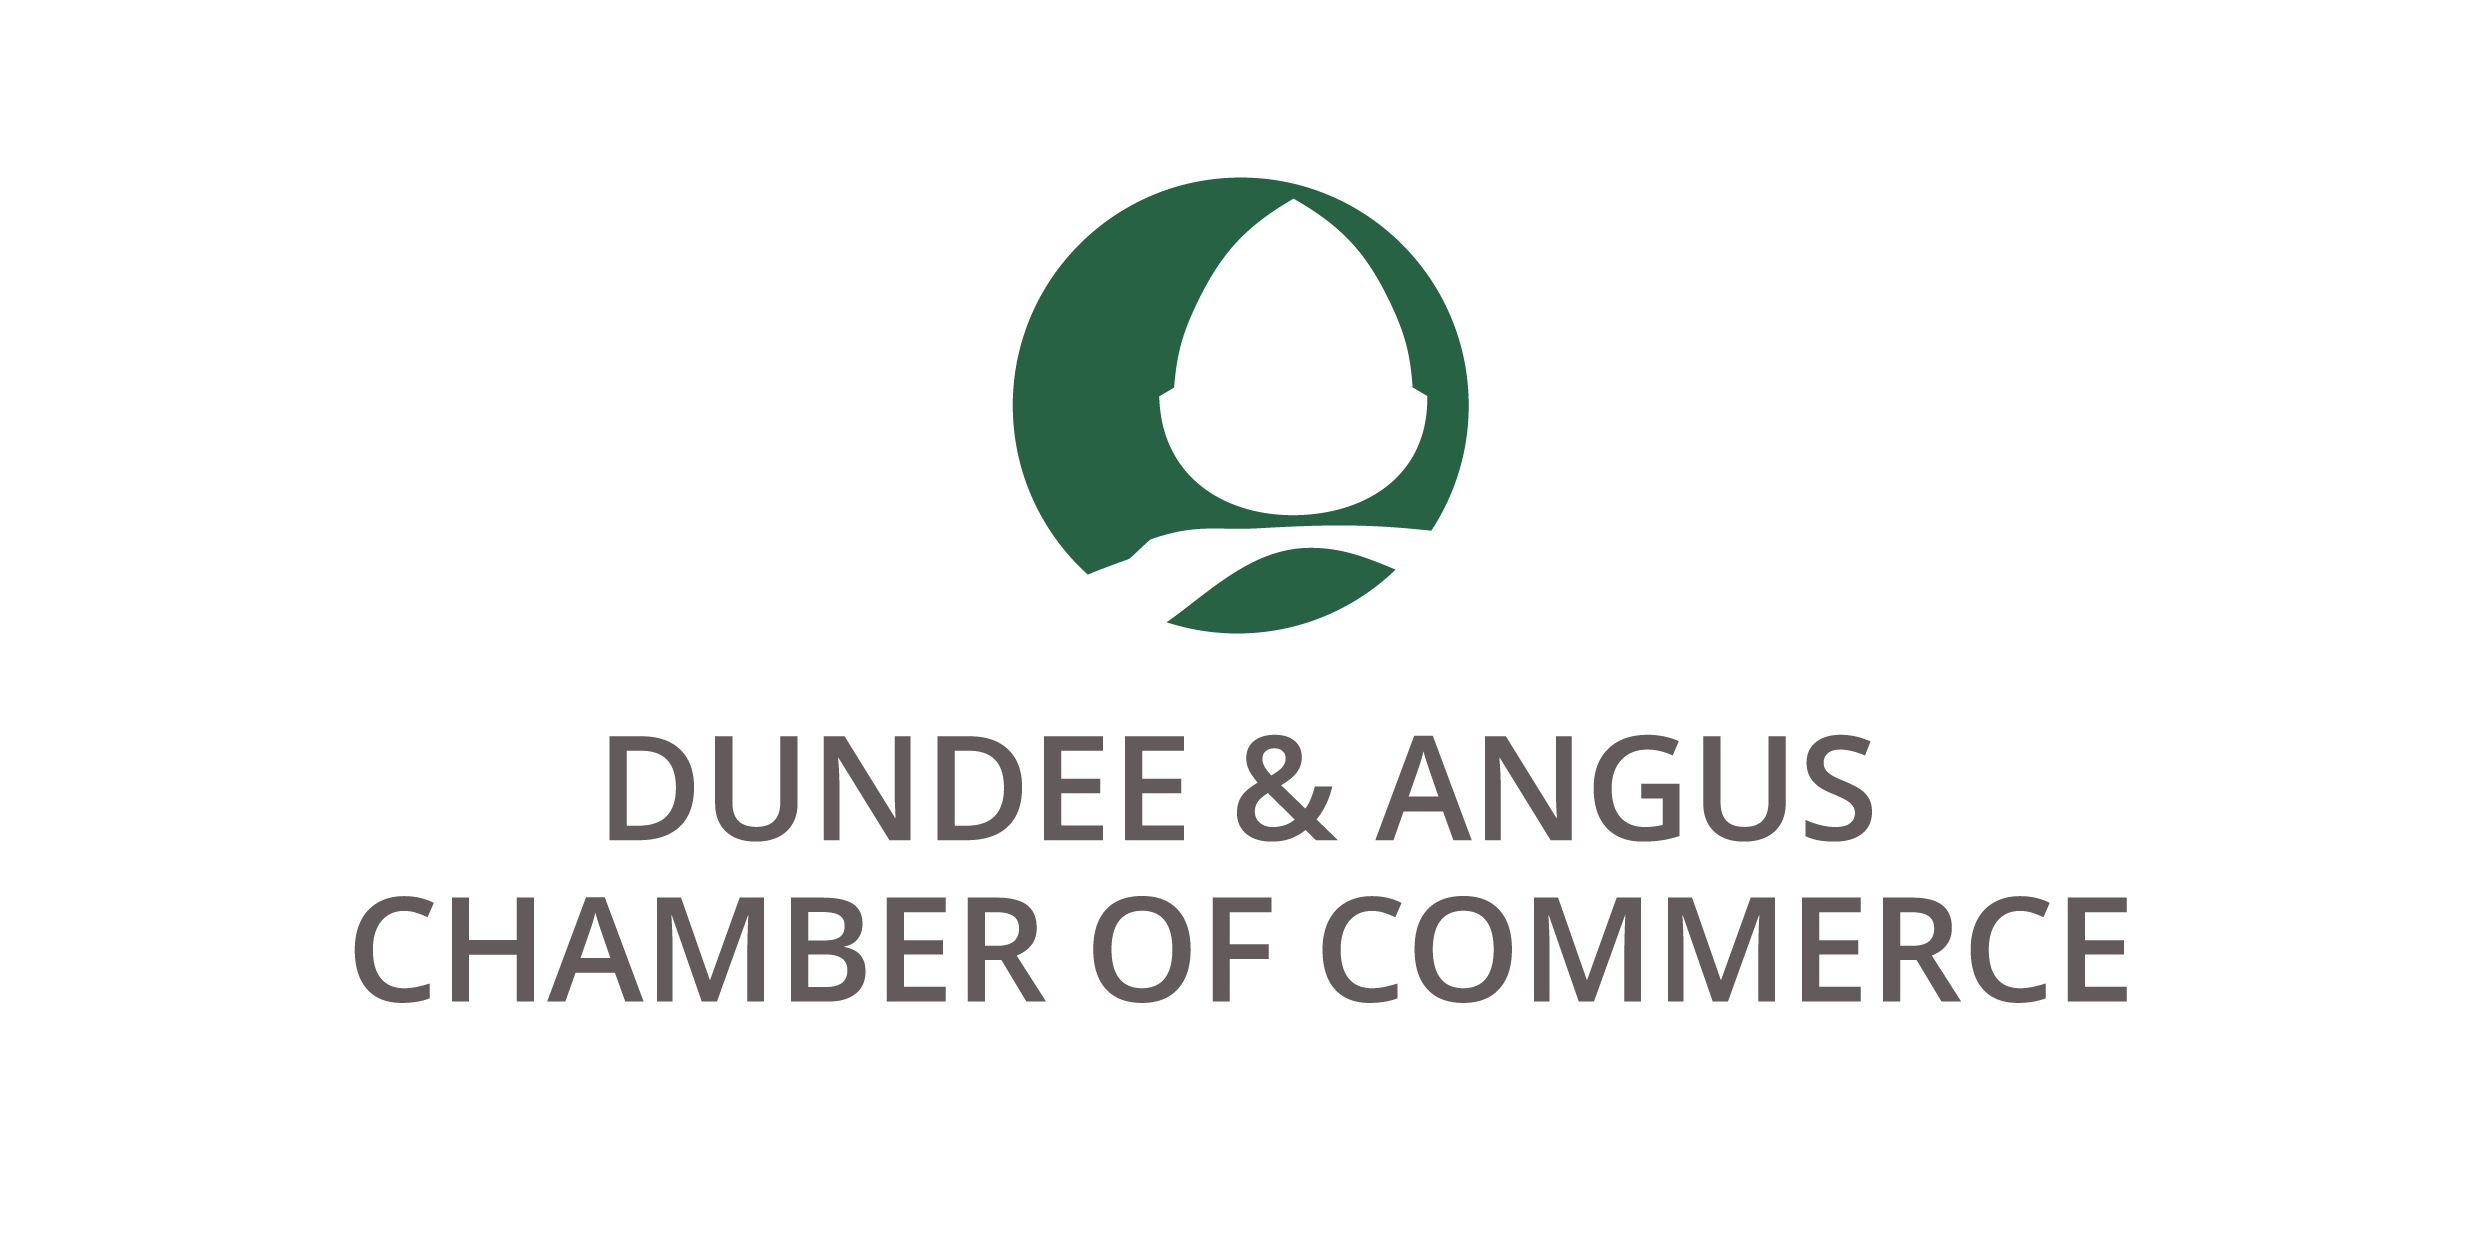 Dundee and Angus Chamber of Commerce